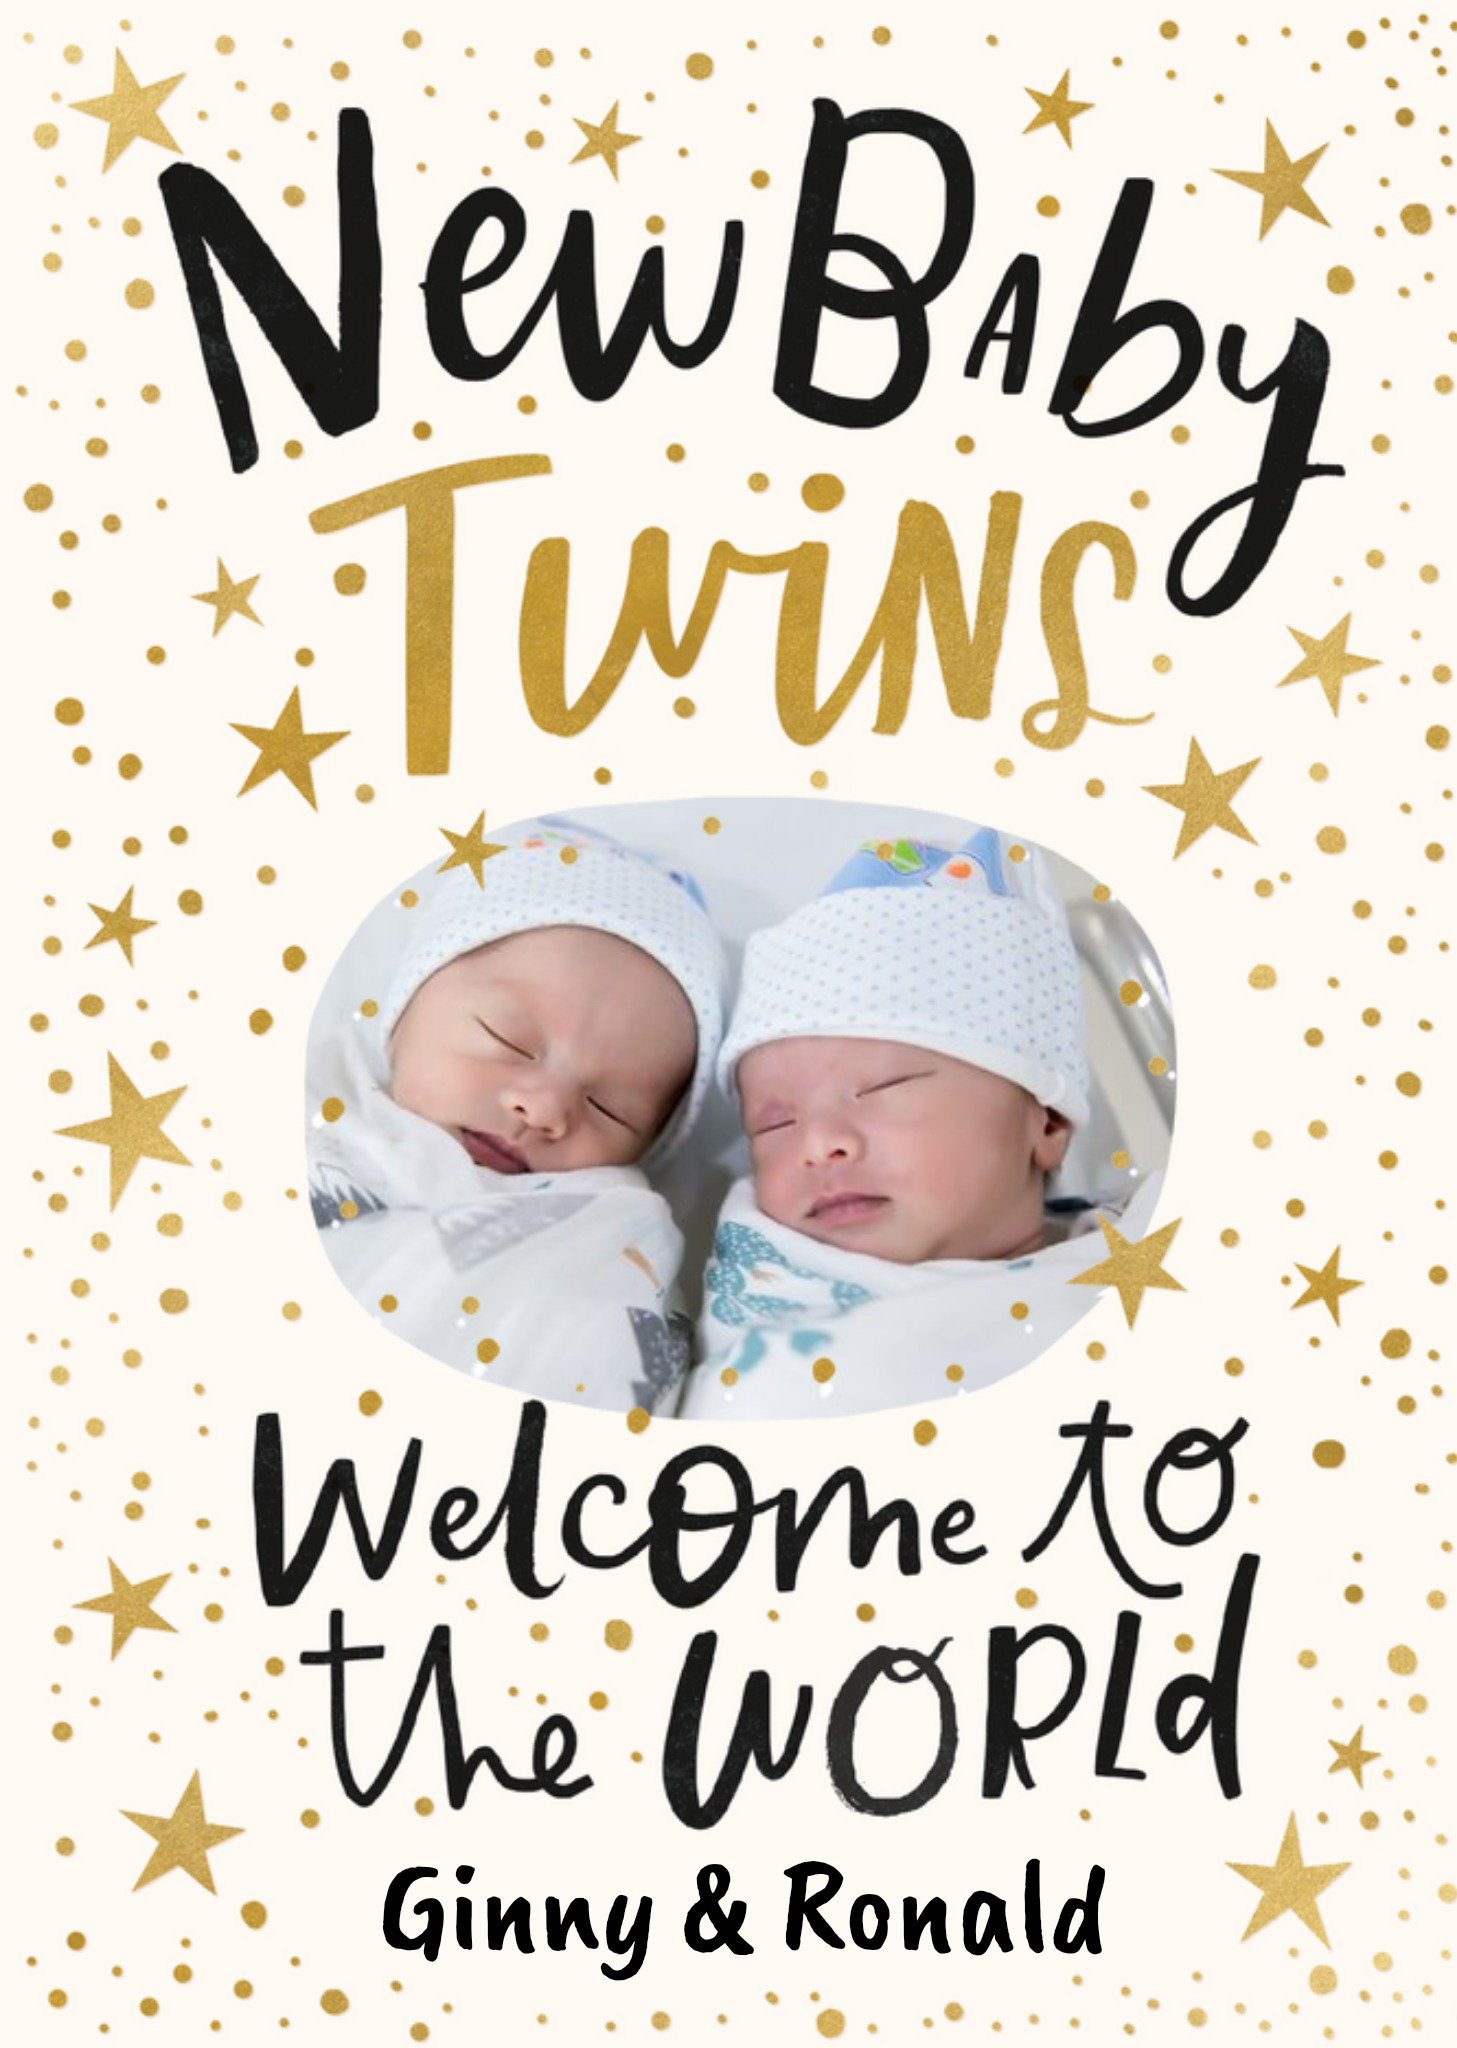 Moonpig New Baby Twins Welcome To The World Photo Upload Card, Large